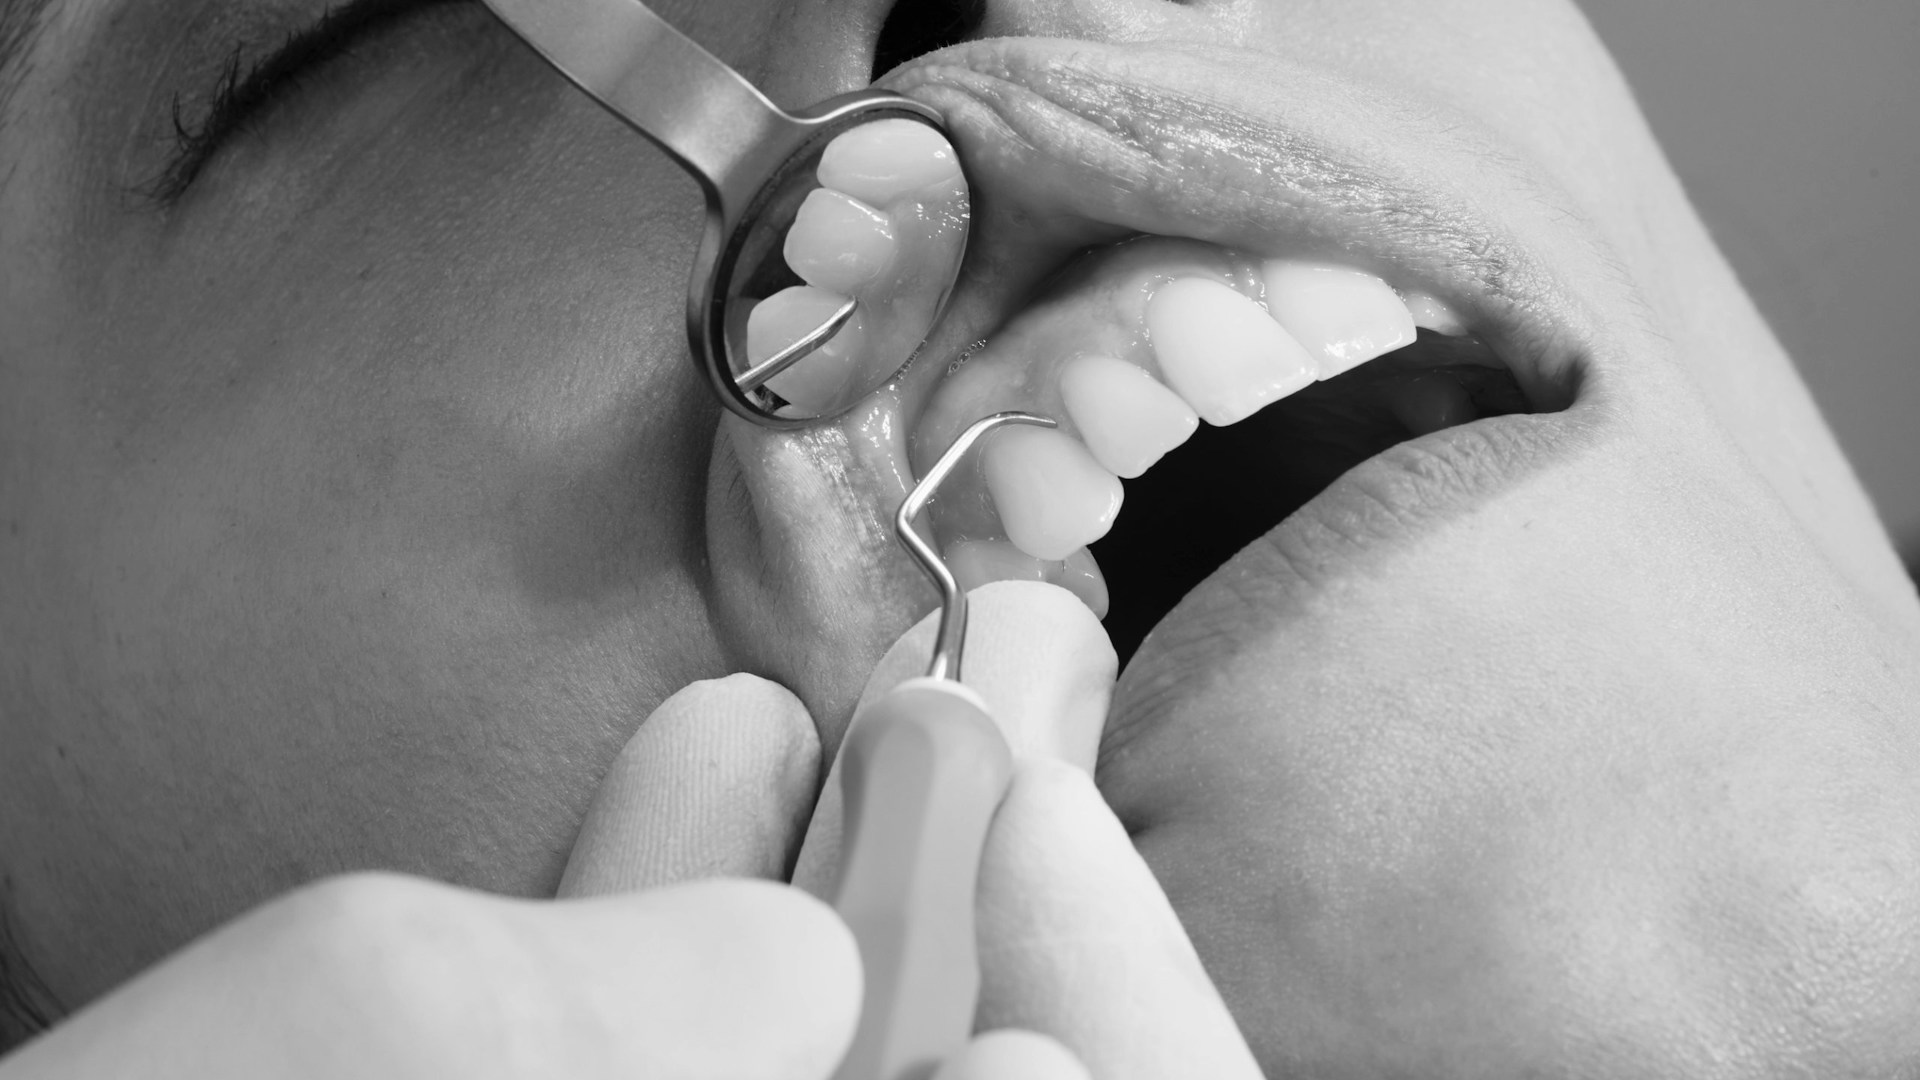 An image of a patient being operated on.